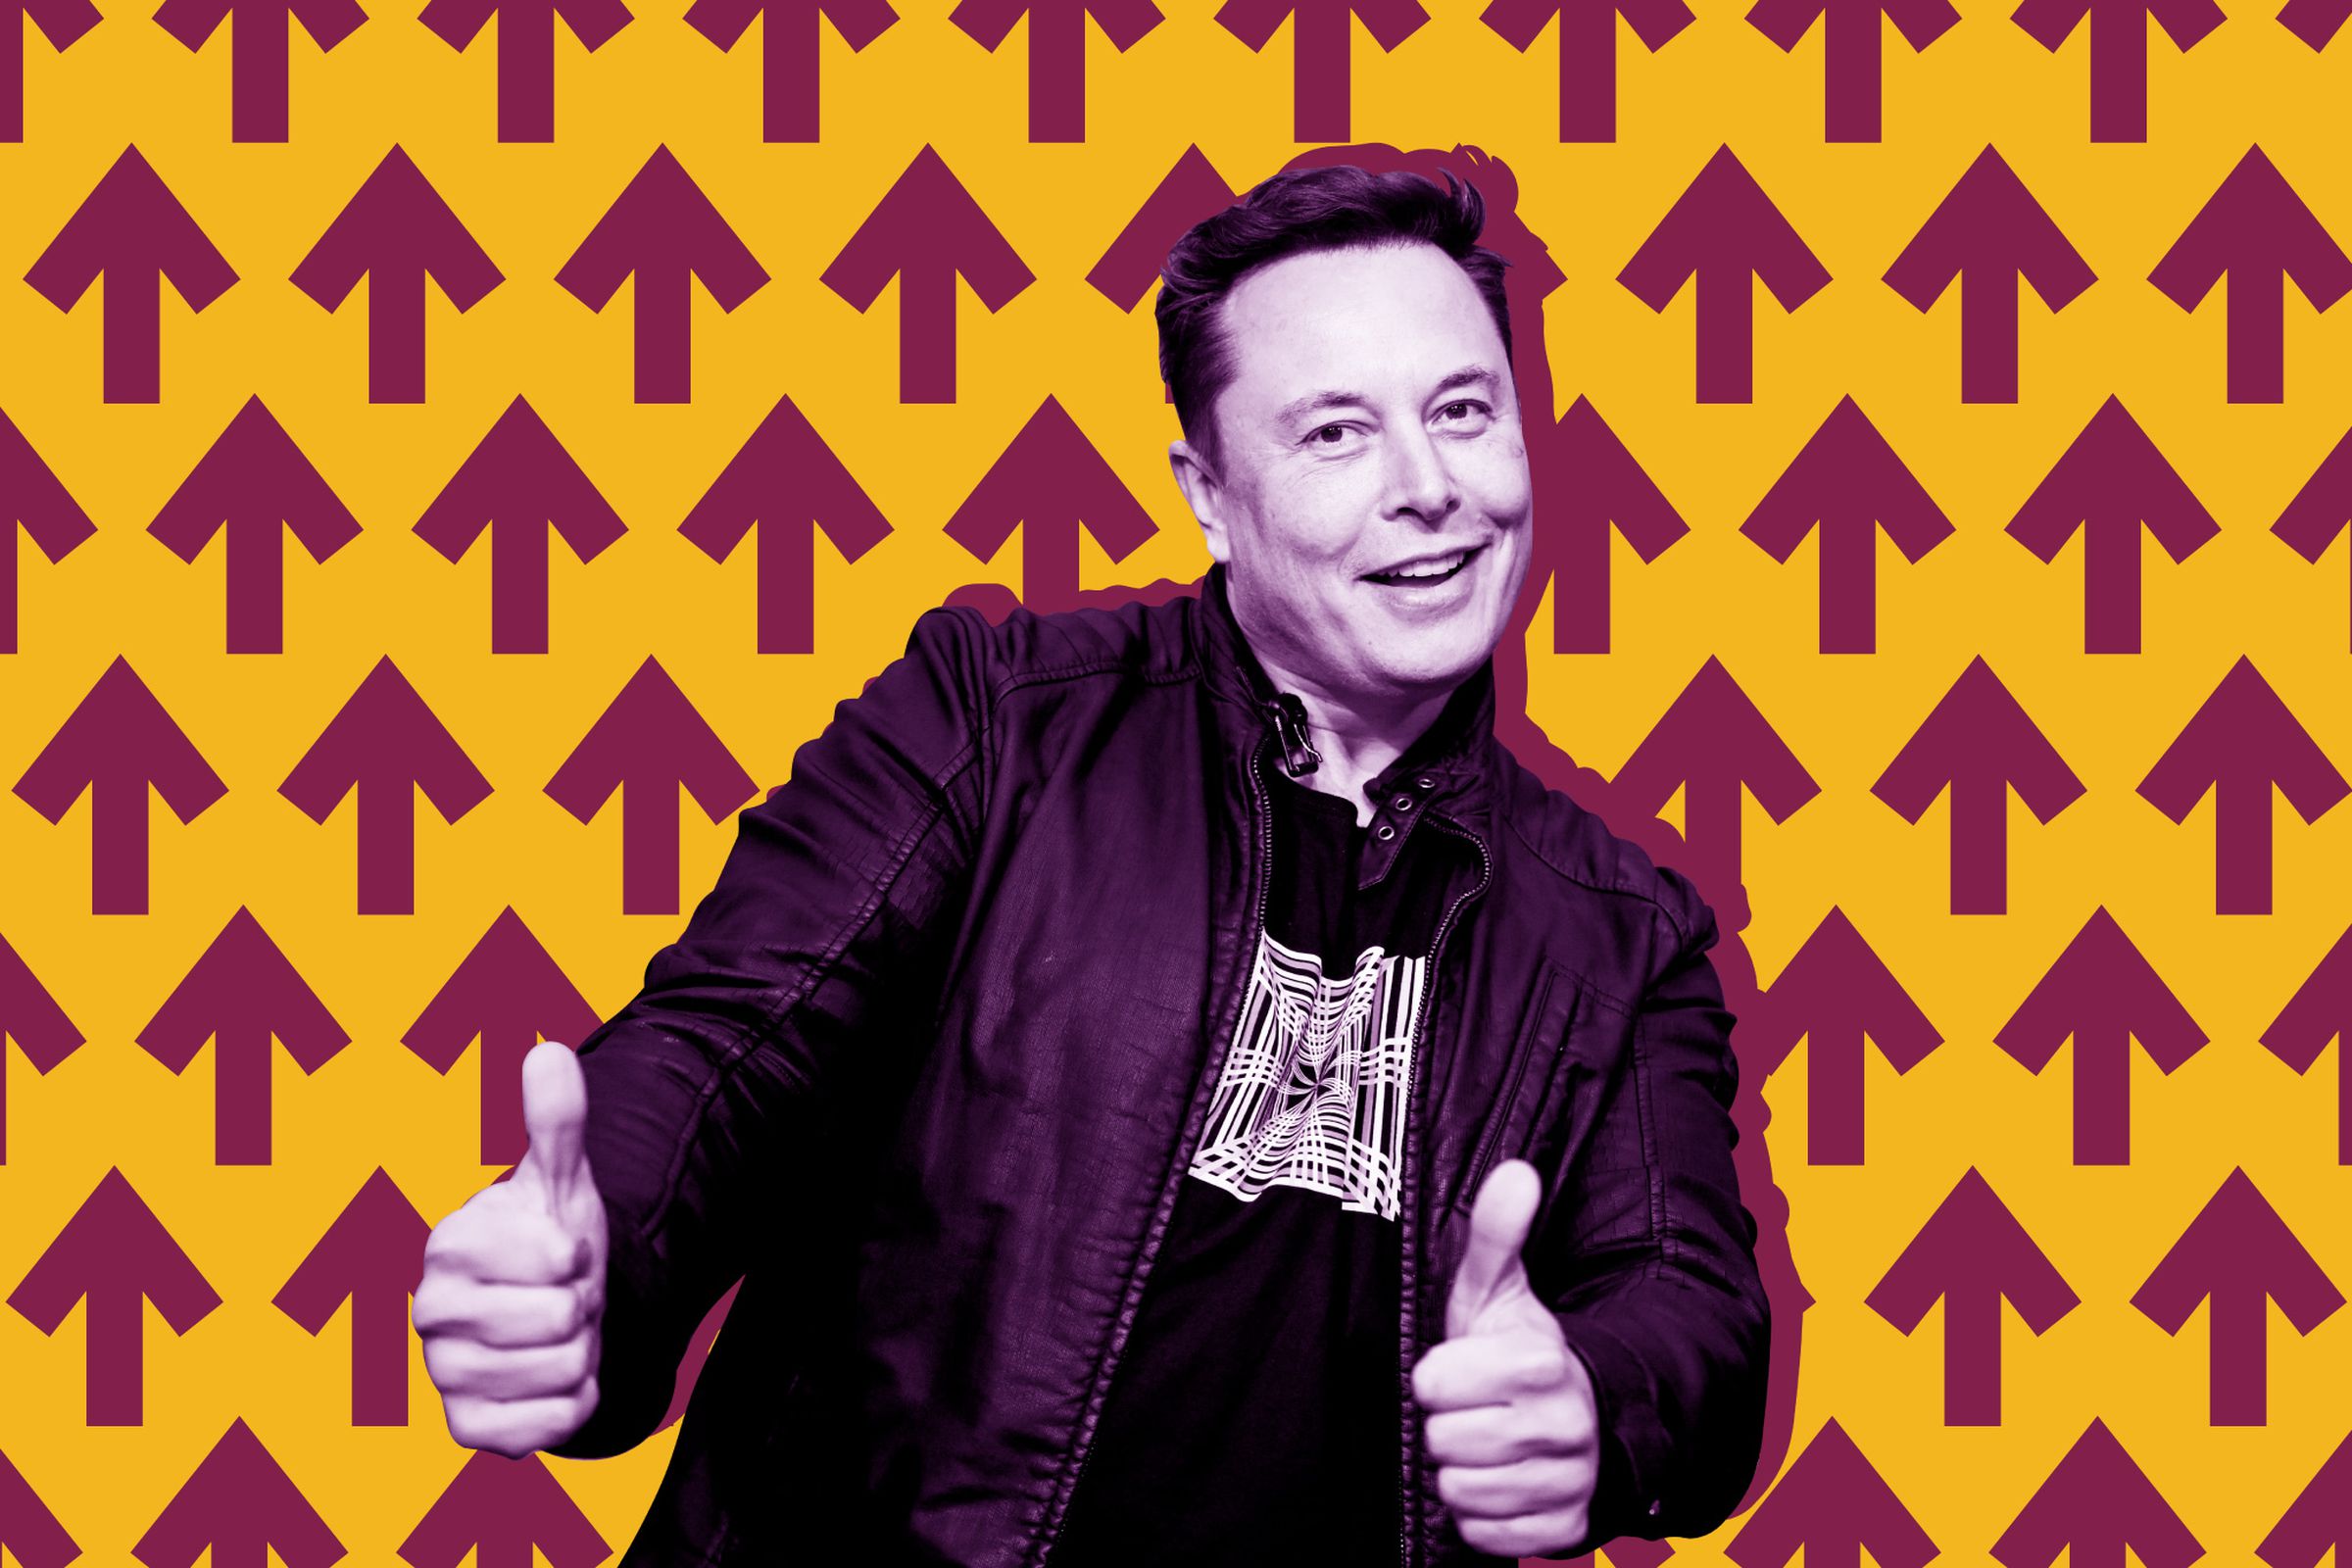 A photo illustration of Elon Musk making a thumbs-up gesture against a background of arrows pointing up.